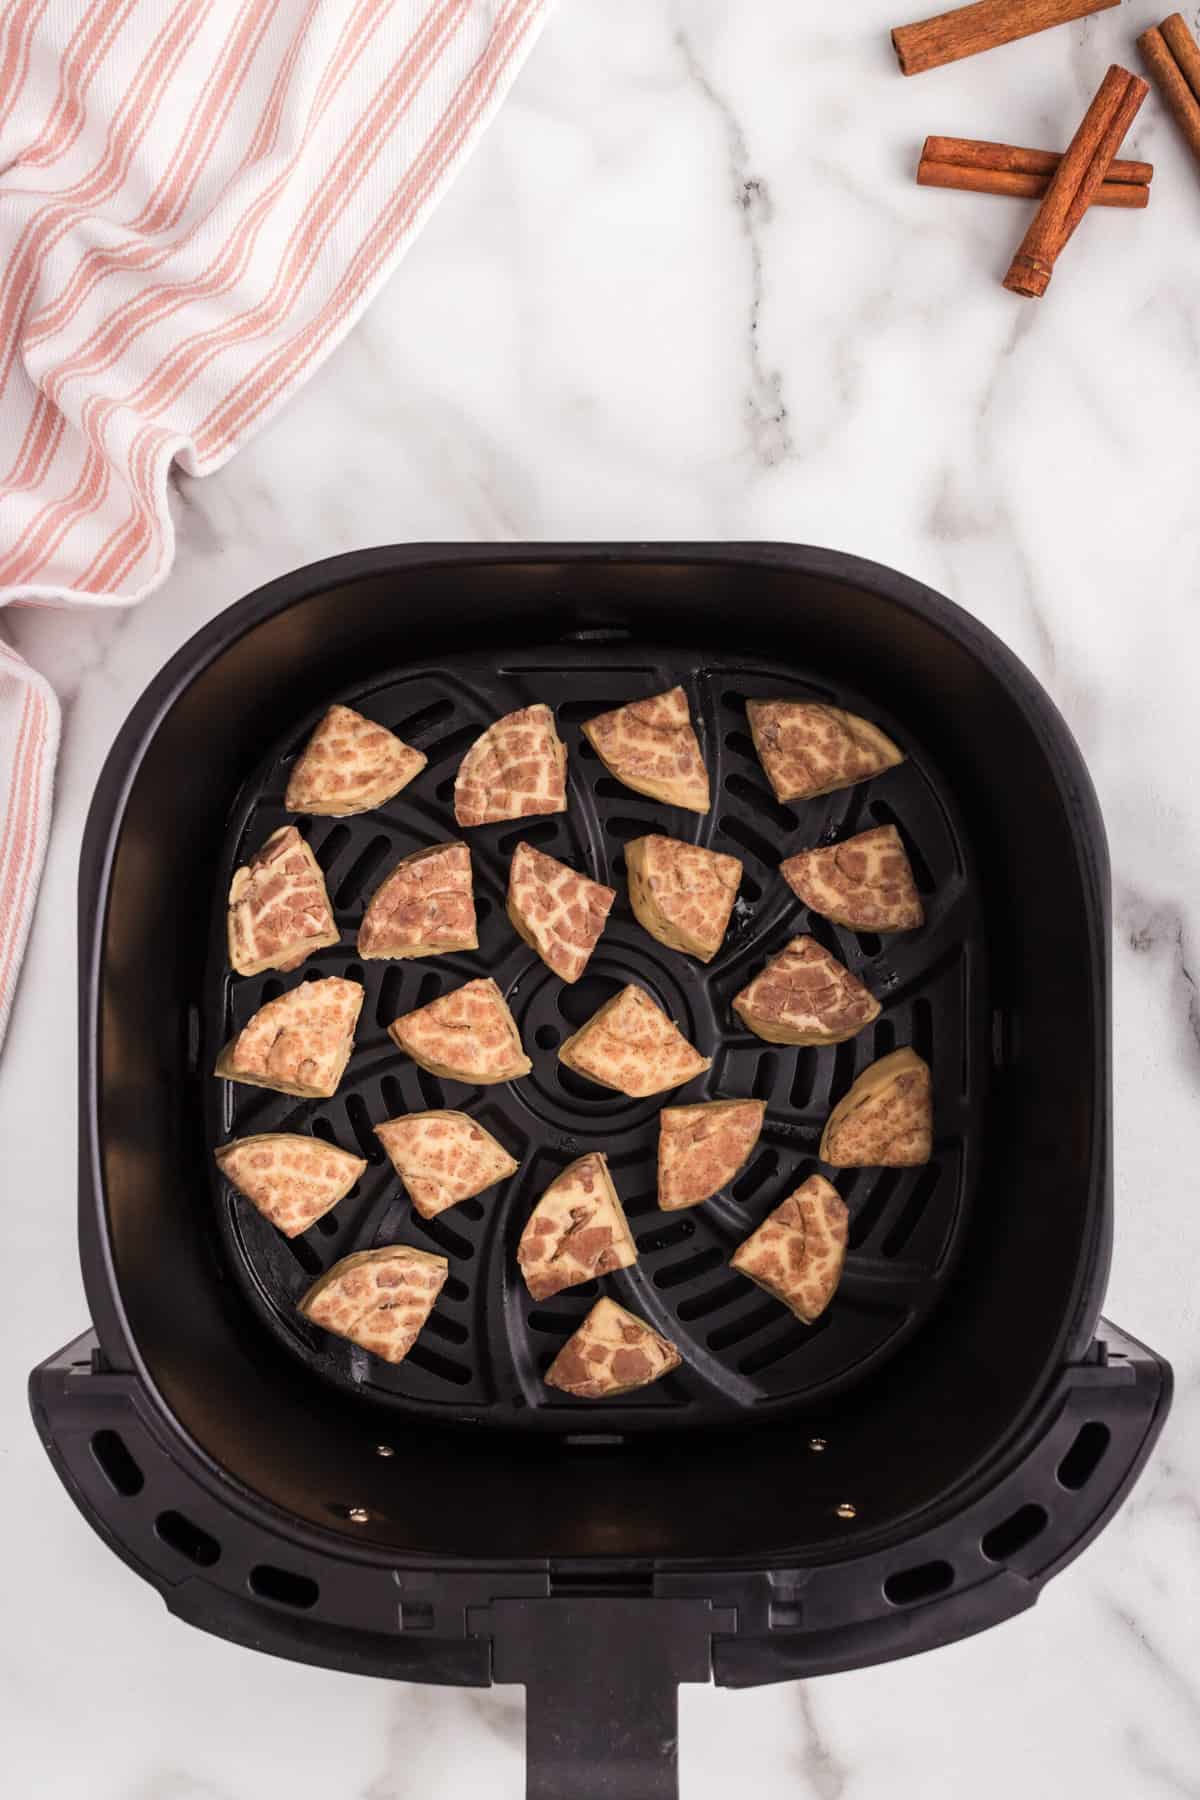 Spray the Air Fryer basket and place the quarters in the air fryer and cook.